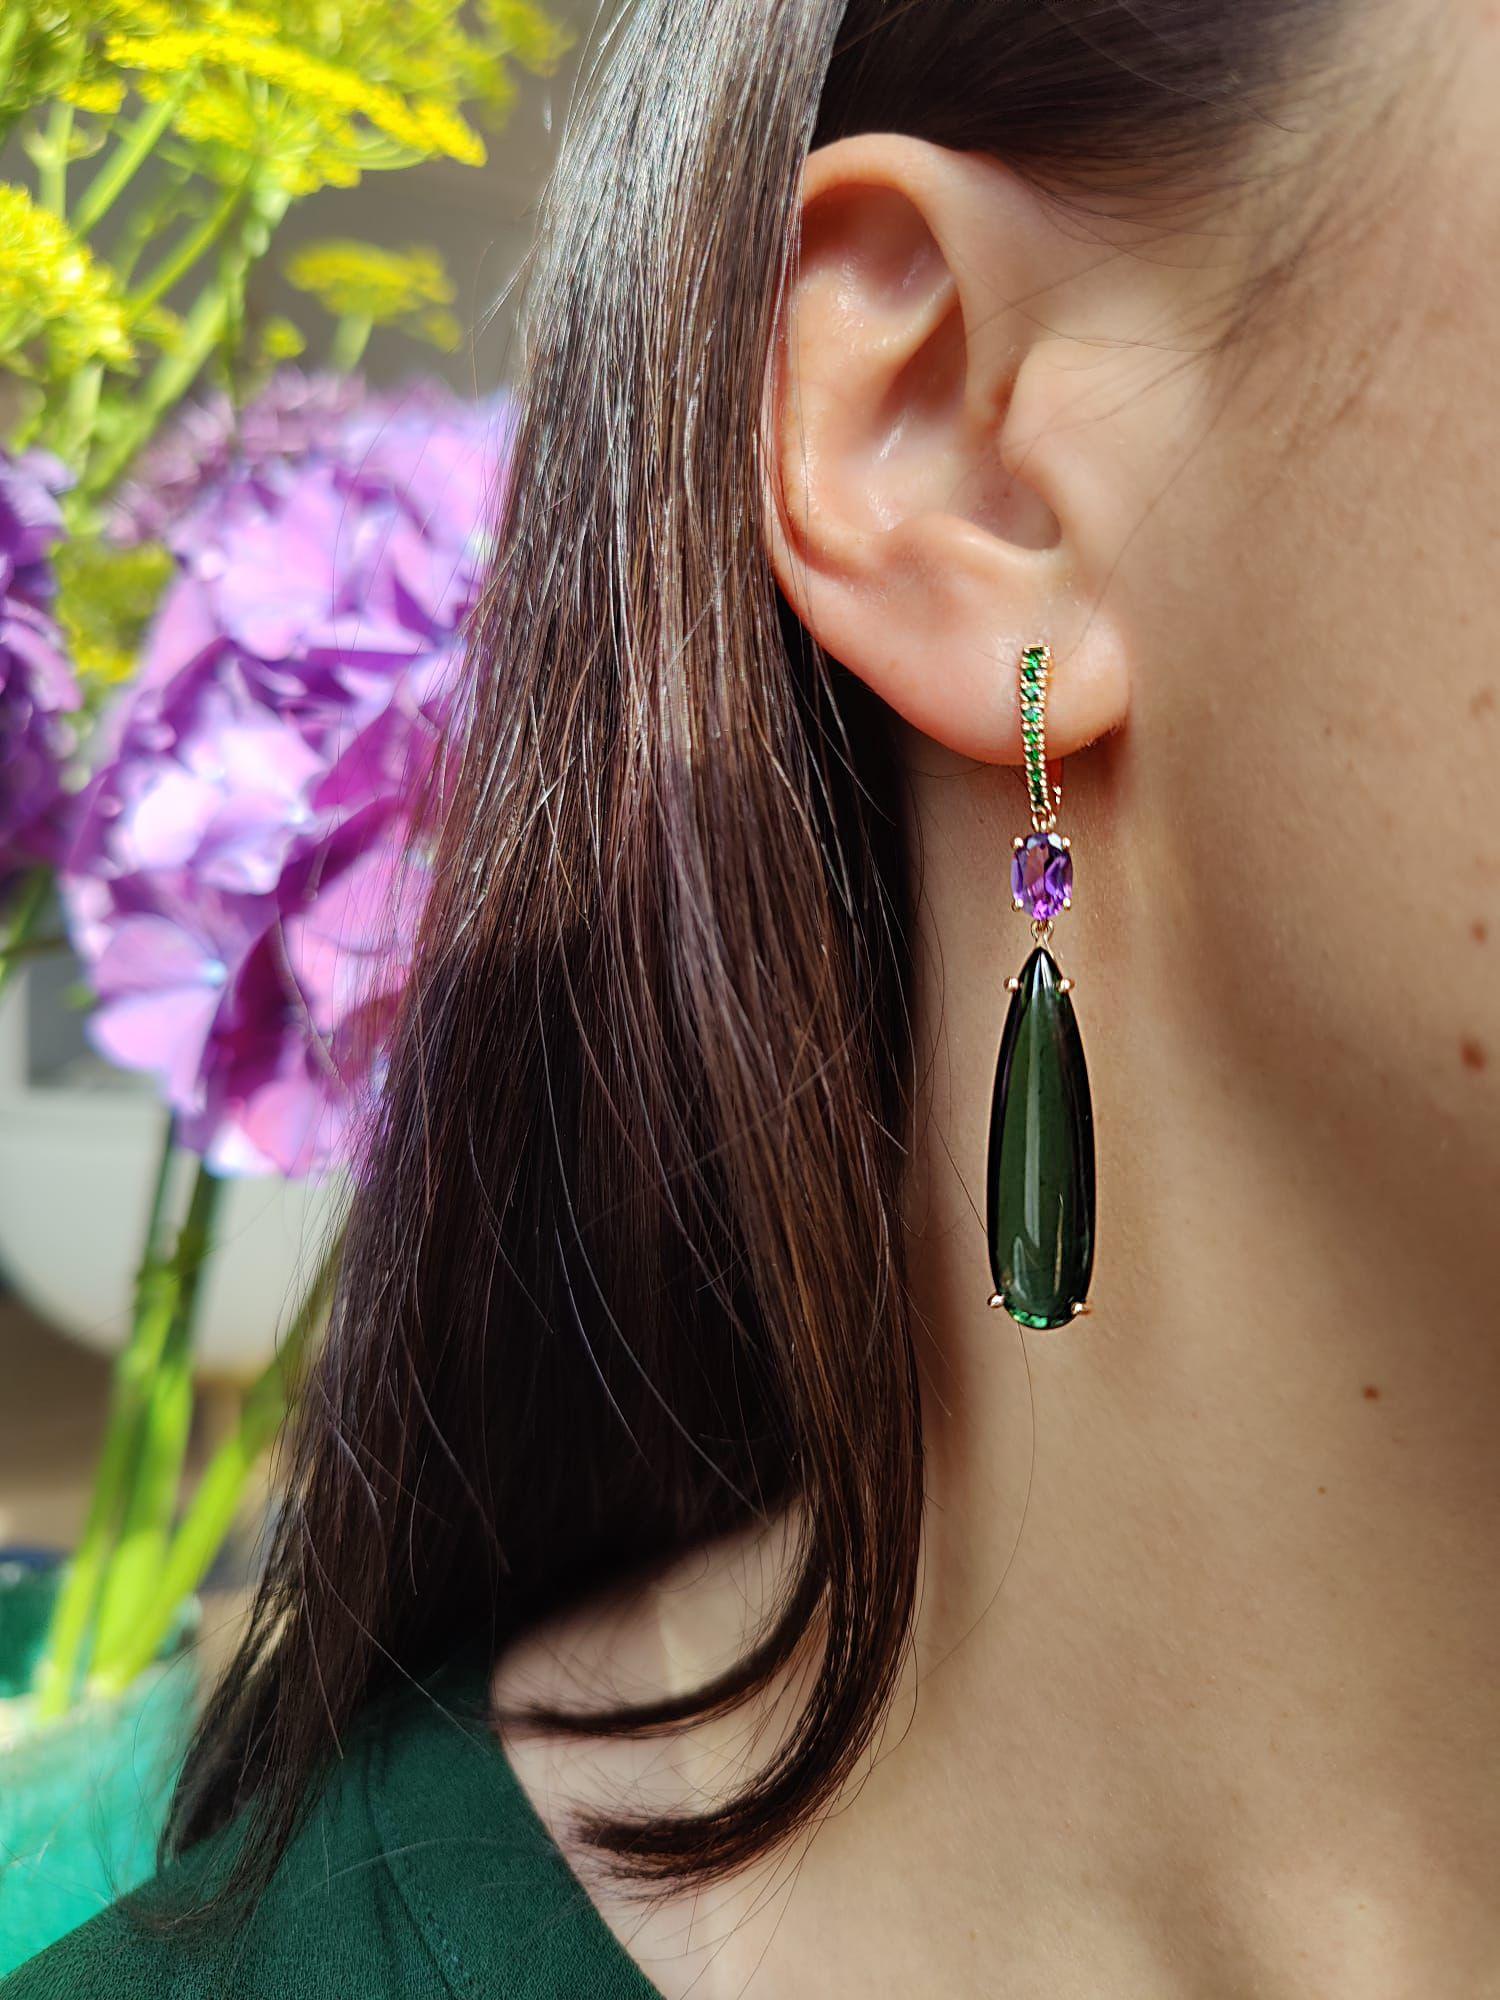 Add some colour with these beautiful drop earrings. Set with high quality green tourmalines in a dangling silhouette that sways as you gesture and laugh. The hook fastenings are traced with tsavorites to give the purple amethyst extra illumination.